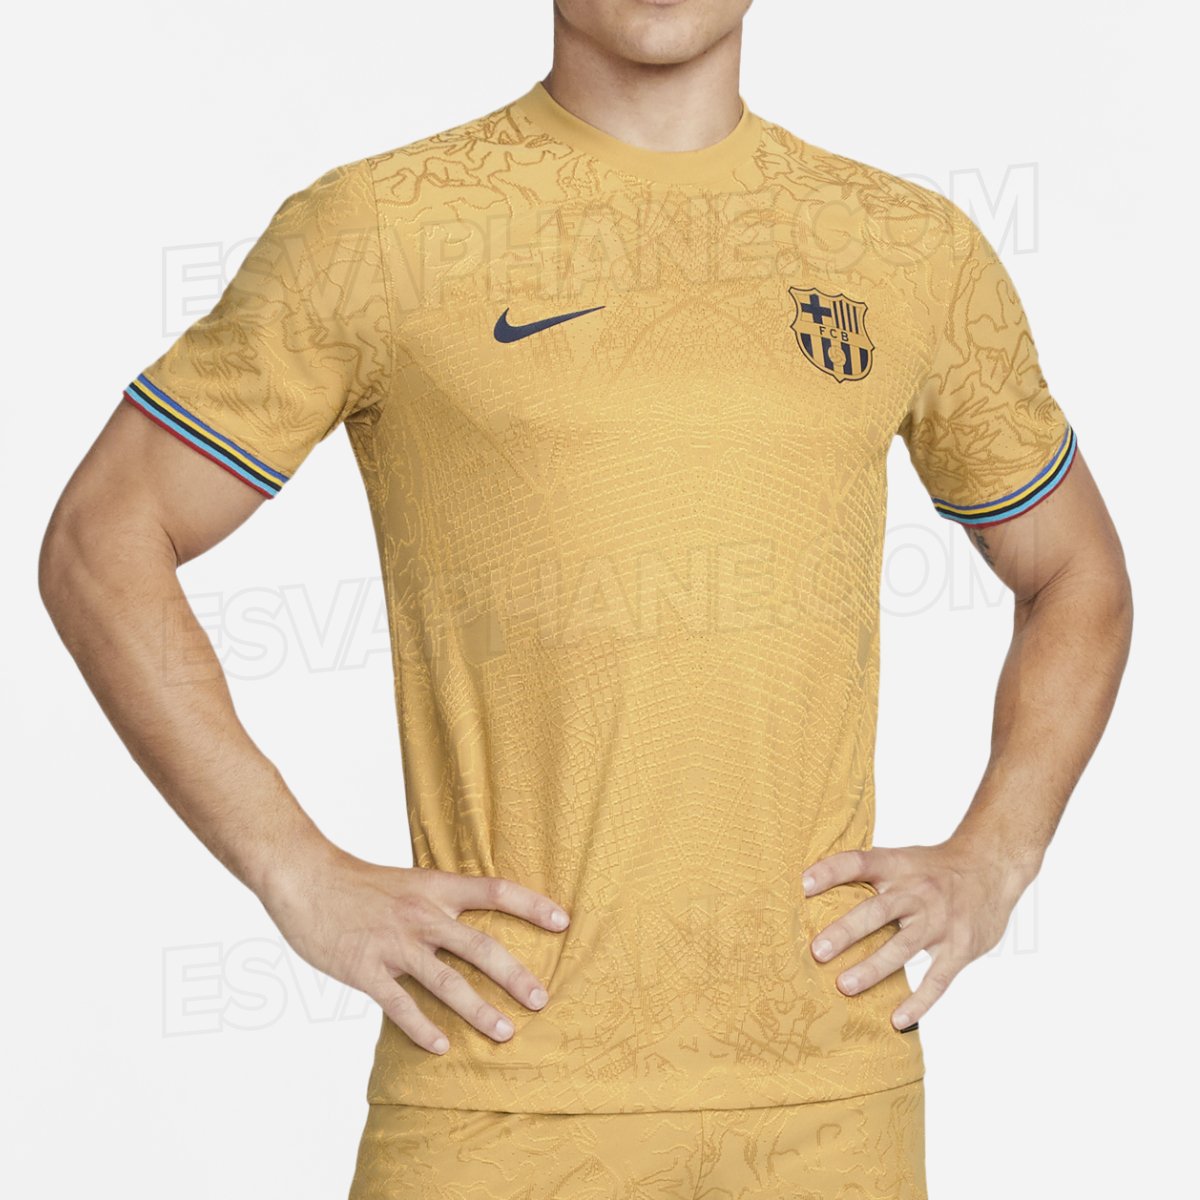 amateur Begrip bevind zich The Shirt Union on Twitter: "🚰| Kit Leaks Product shots of Barcelona's  gold away has emerged thanks to @esvaphane. There definitely looks to be a  map of the city within the shirt,